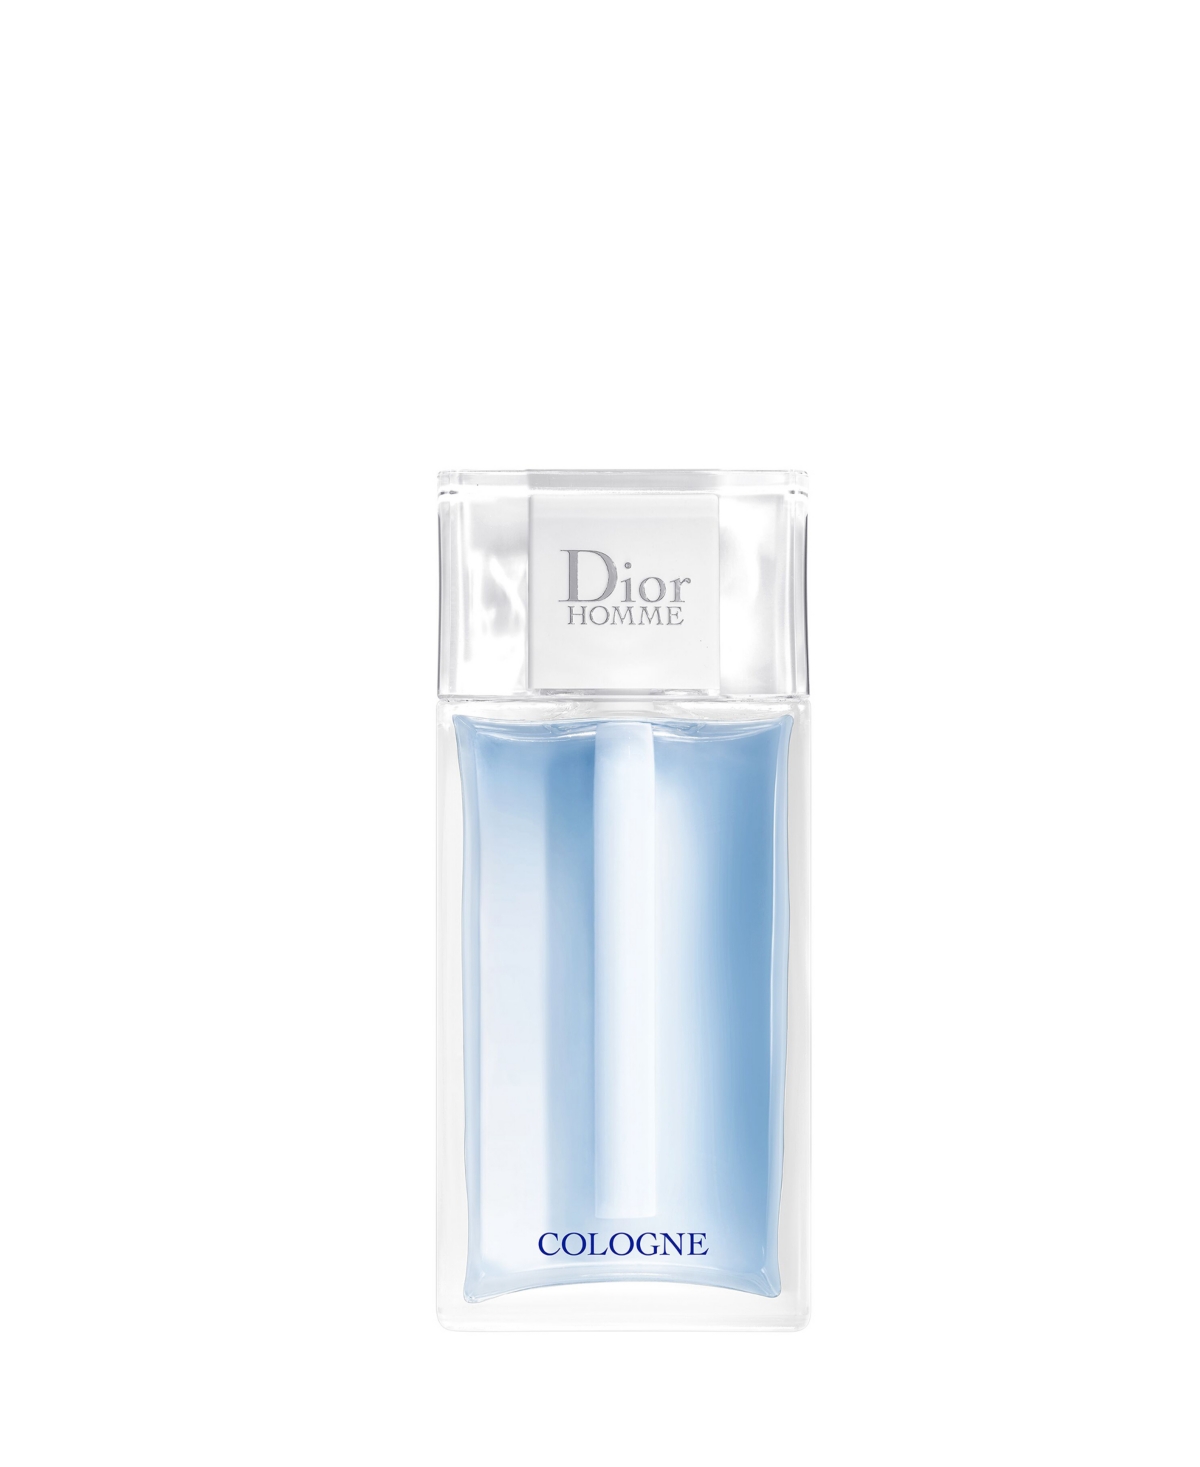 Dior Homme Cologne (200ml) In No Color